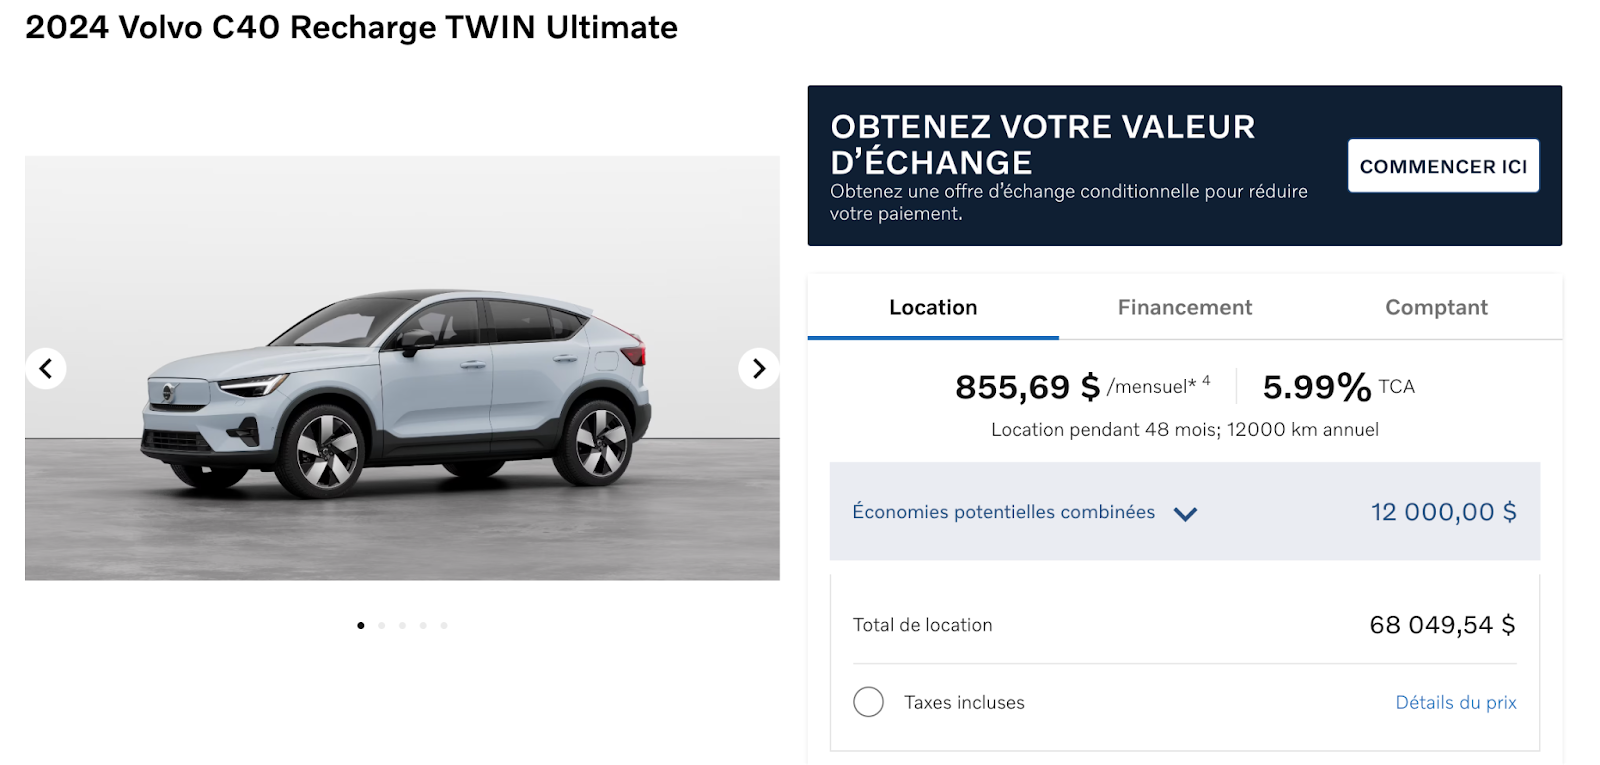 Which Volvos are eligible for government rebates?